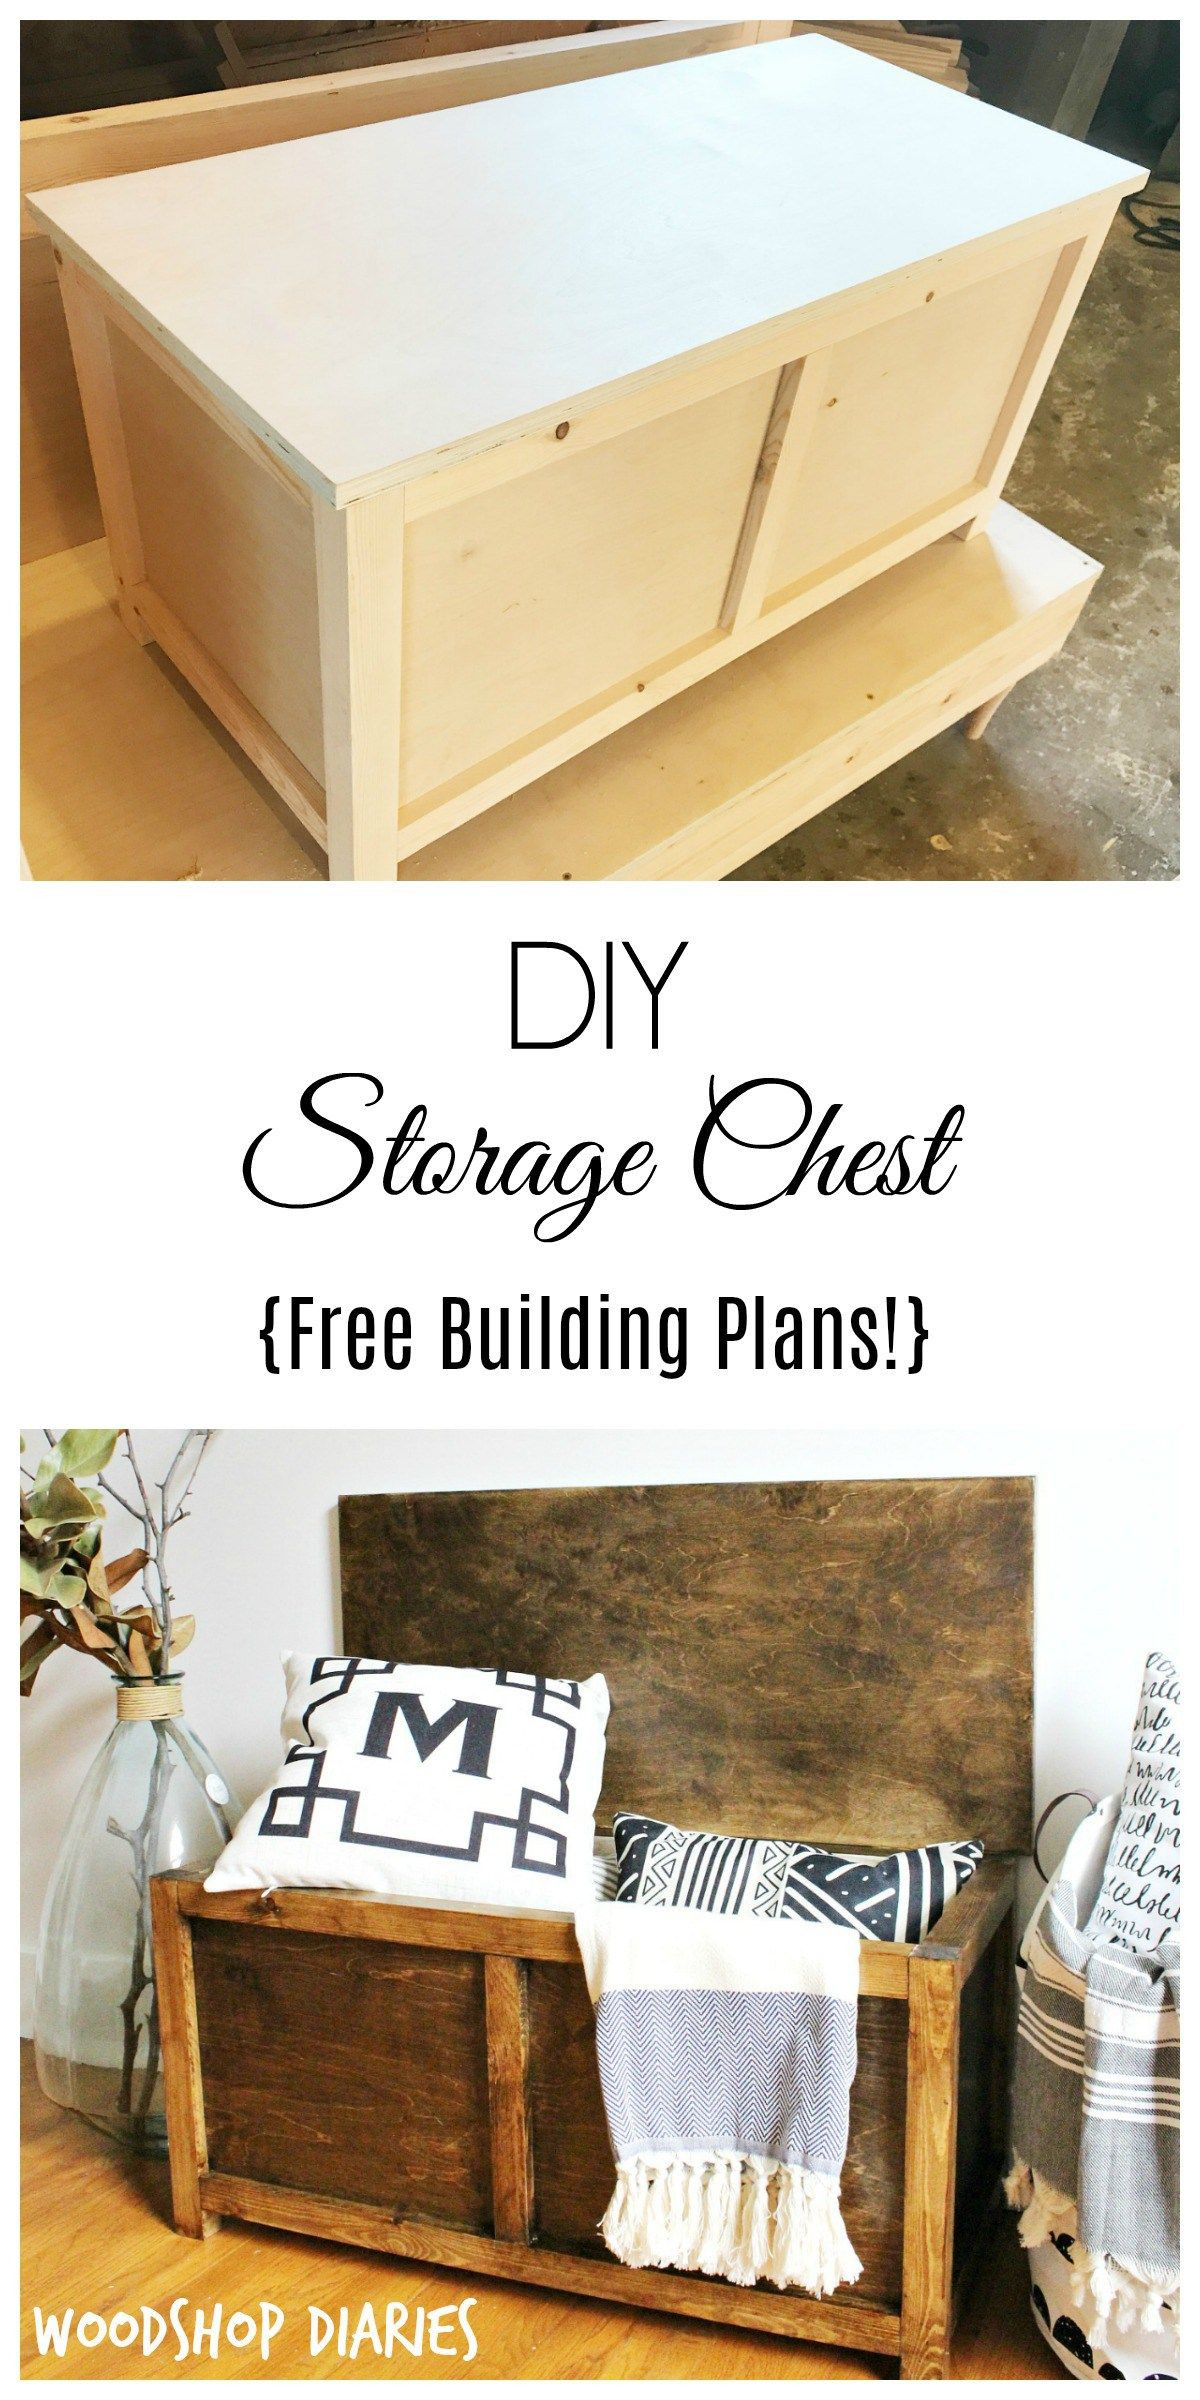 DIY Wooden Storage Box Plans
 How to Build a Simple DIY Storage Chest